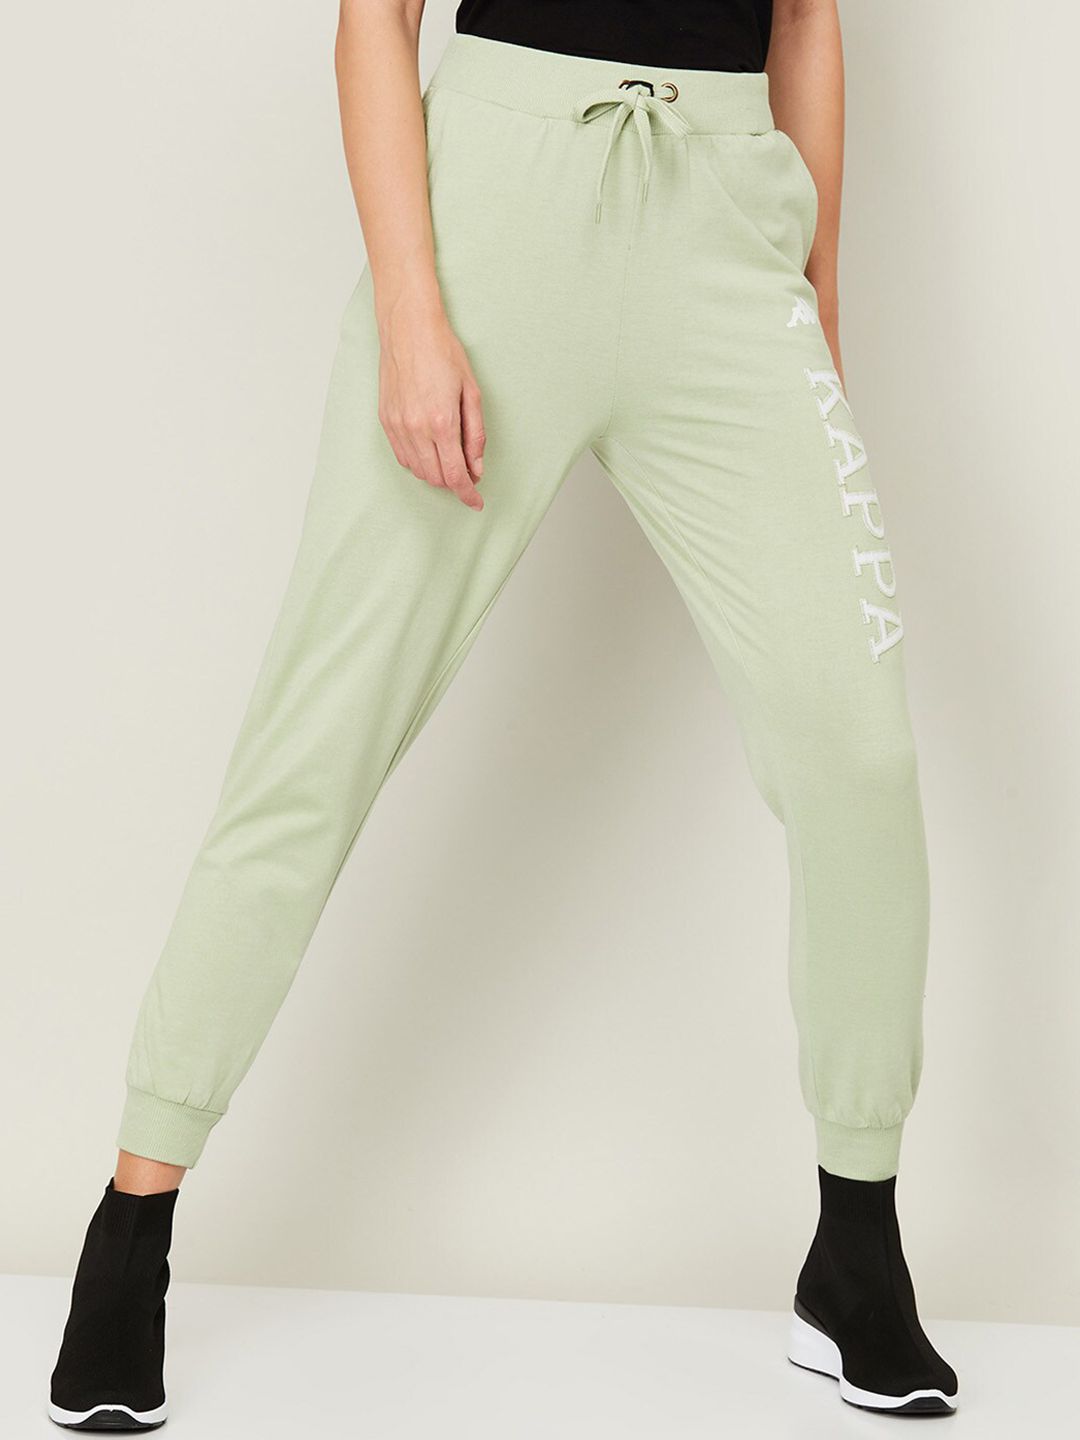 Kappa Women Green Cotton Blend Training or Gym Track Pants Price in India